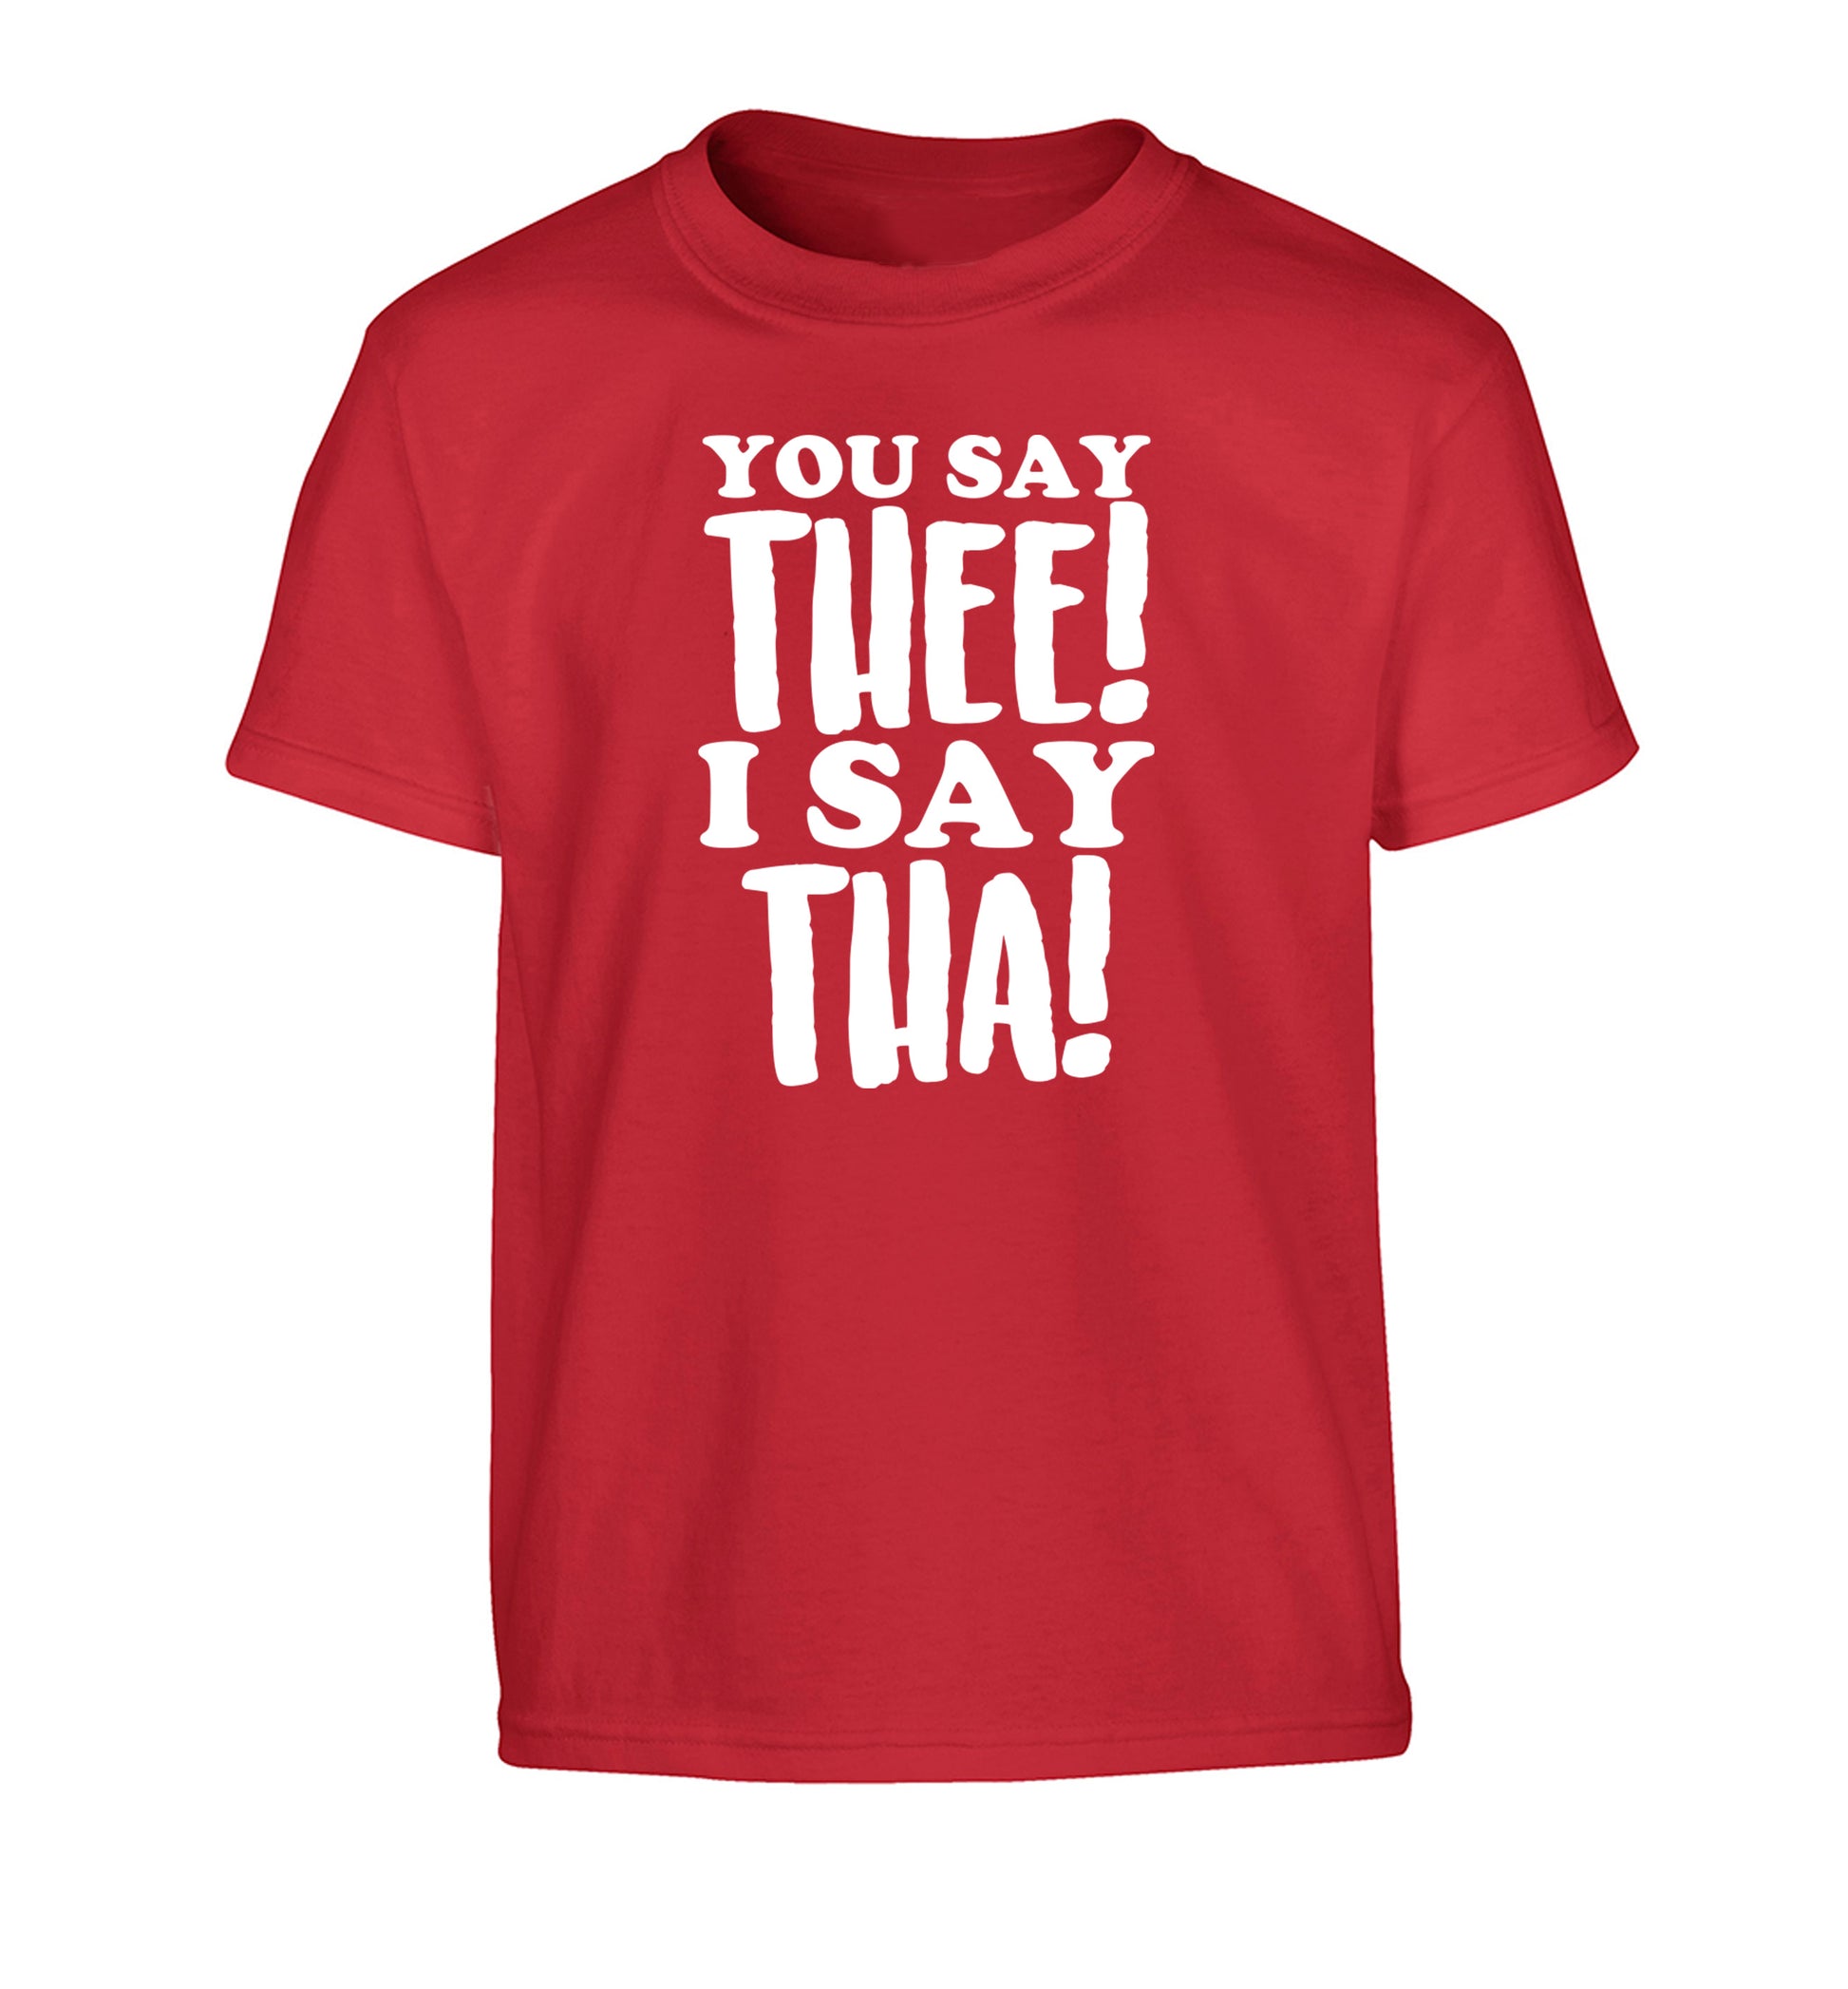 You say thee I say tha Children's red Tshirt 12-14 Years